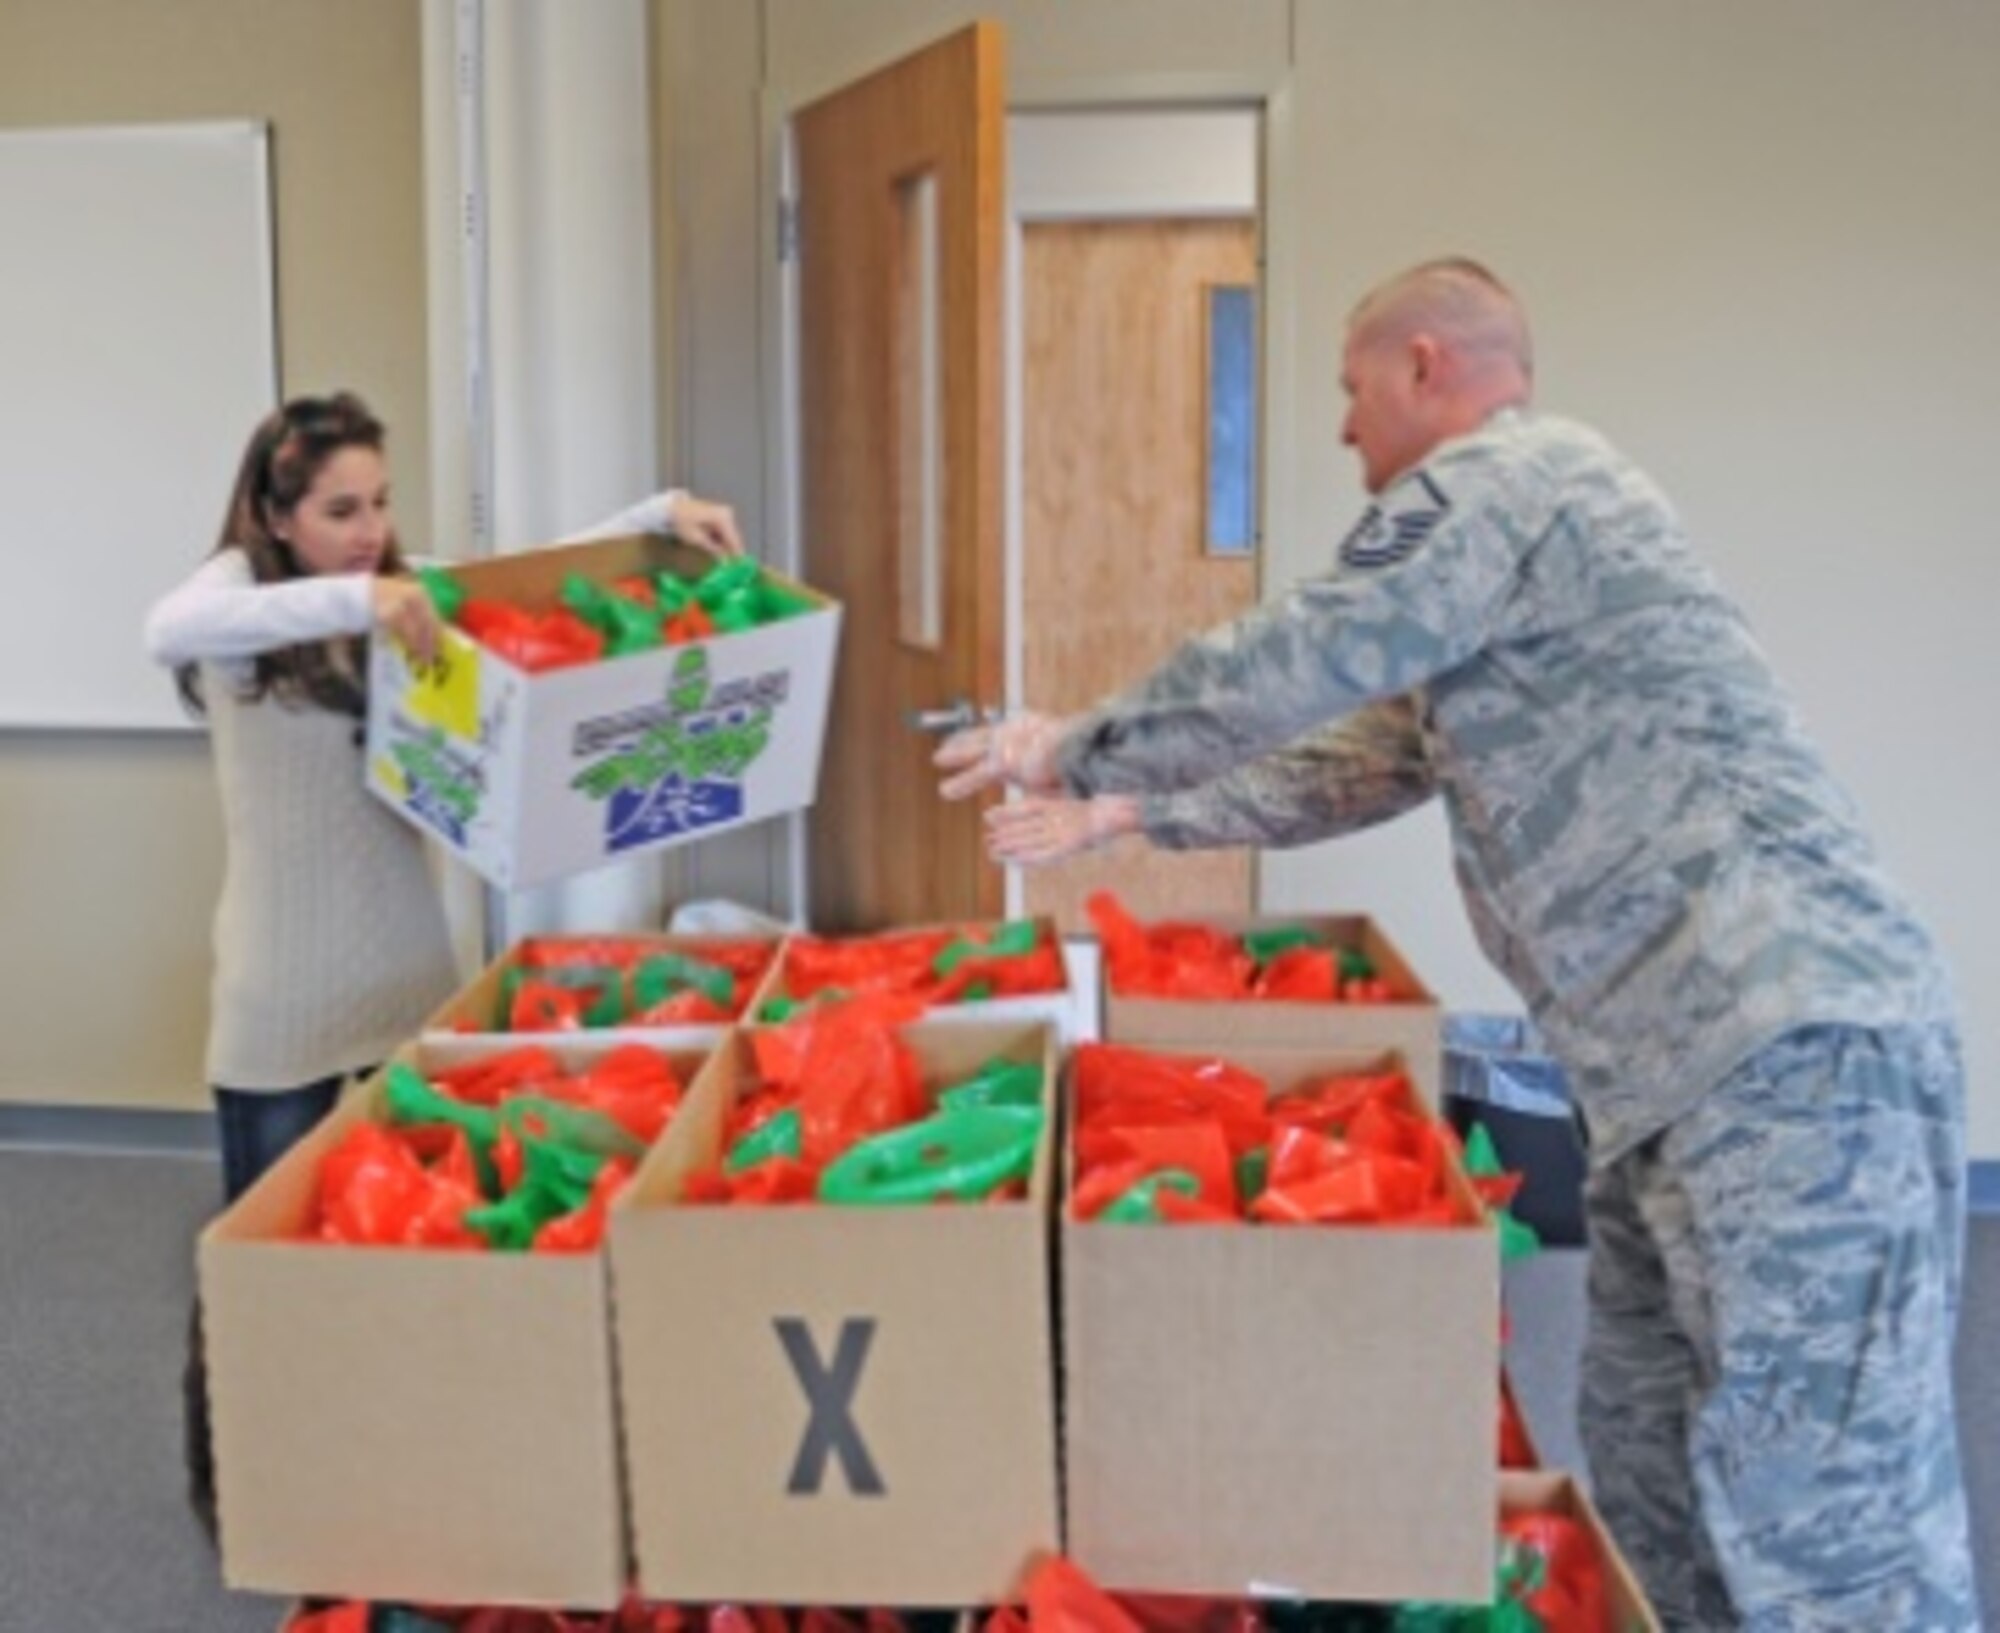 U.S. Air Force Master Sgt. Joshua Anderson, 7th Bomb Wing Inspection Superintendent, helps organize boxes of cookies for the annual Cookie Drop Dec. 13, 2013, at Dyess Air Force Base, Texas. The first sergeants volunteered to delivered cookies to dorm residents for the holidays in order to help boost morale. (U.S. Air Force photo by Airman 1st Class Kedesha Pennant/Released)